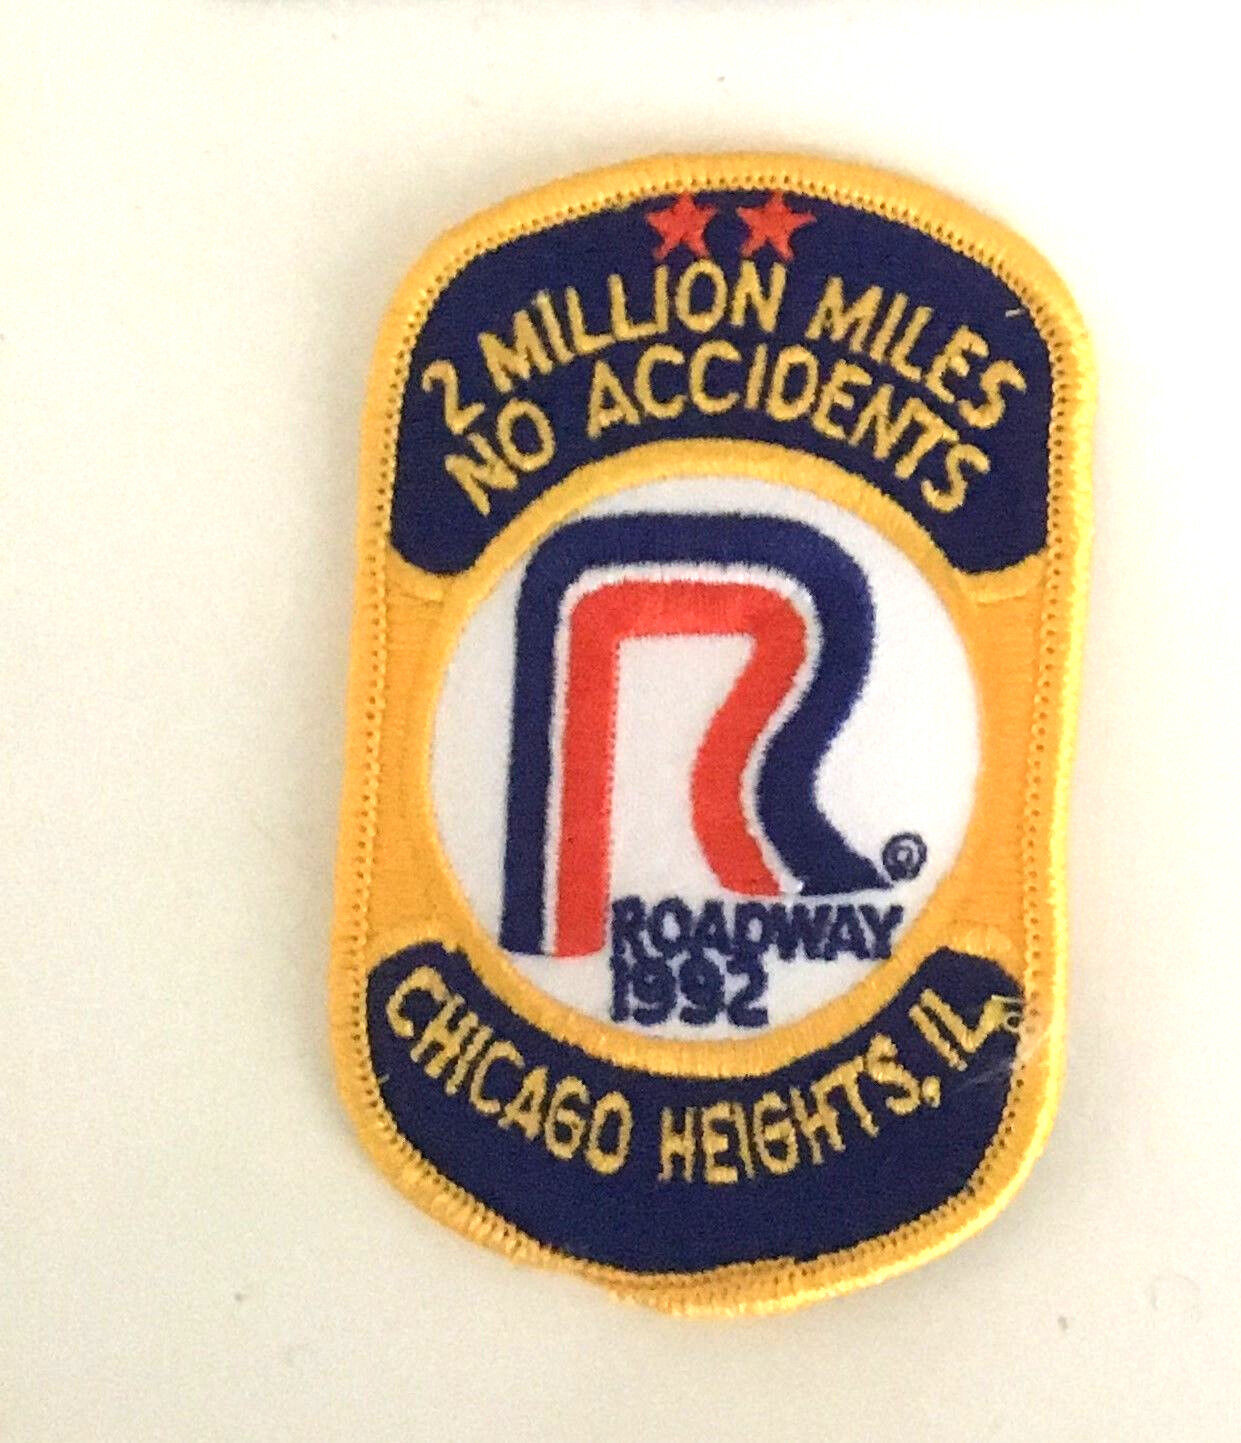 Roadway Express 1992 driver patch 2 mil mile Chicago Heights IL 4X2-3/4 #444